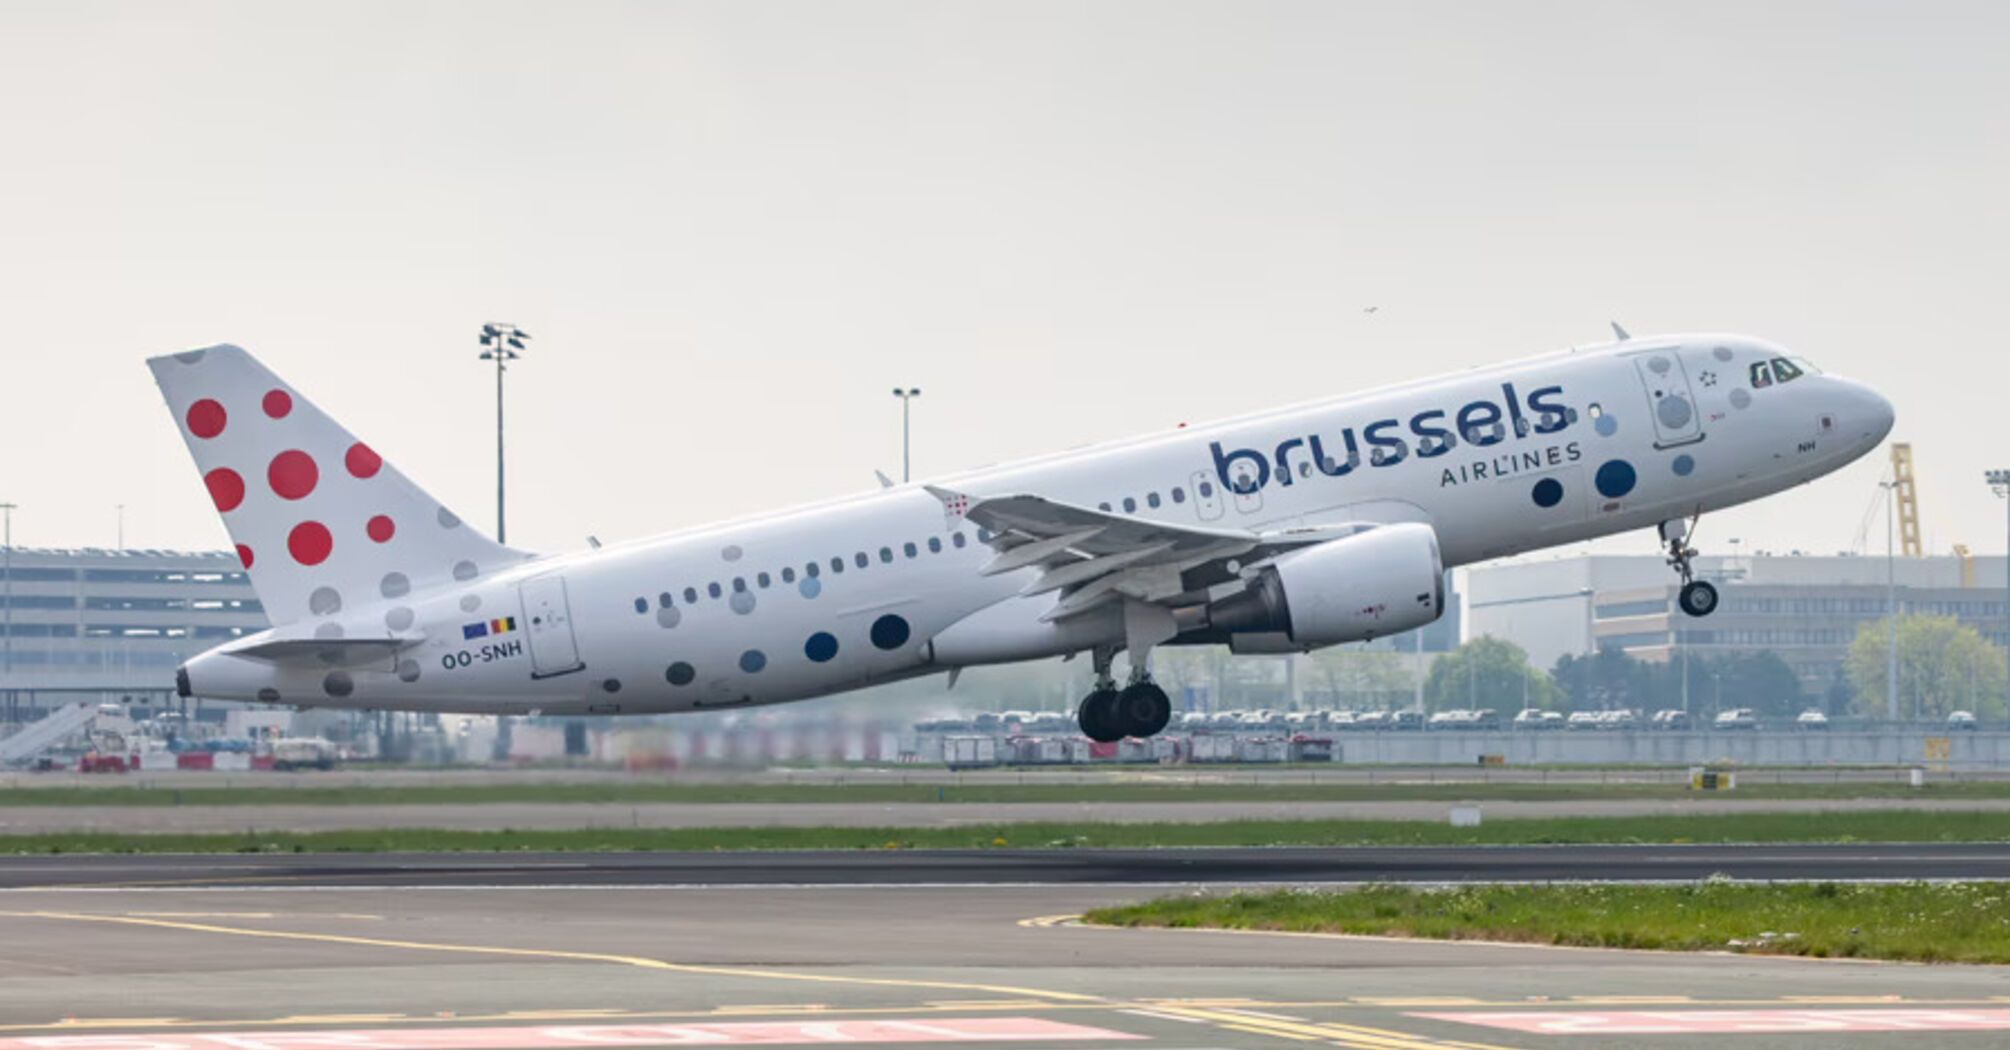 This summer only 3 UK airports will operate flights to Brussels